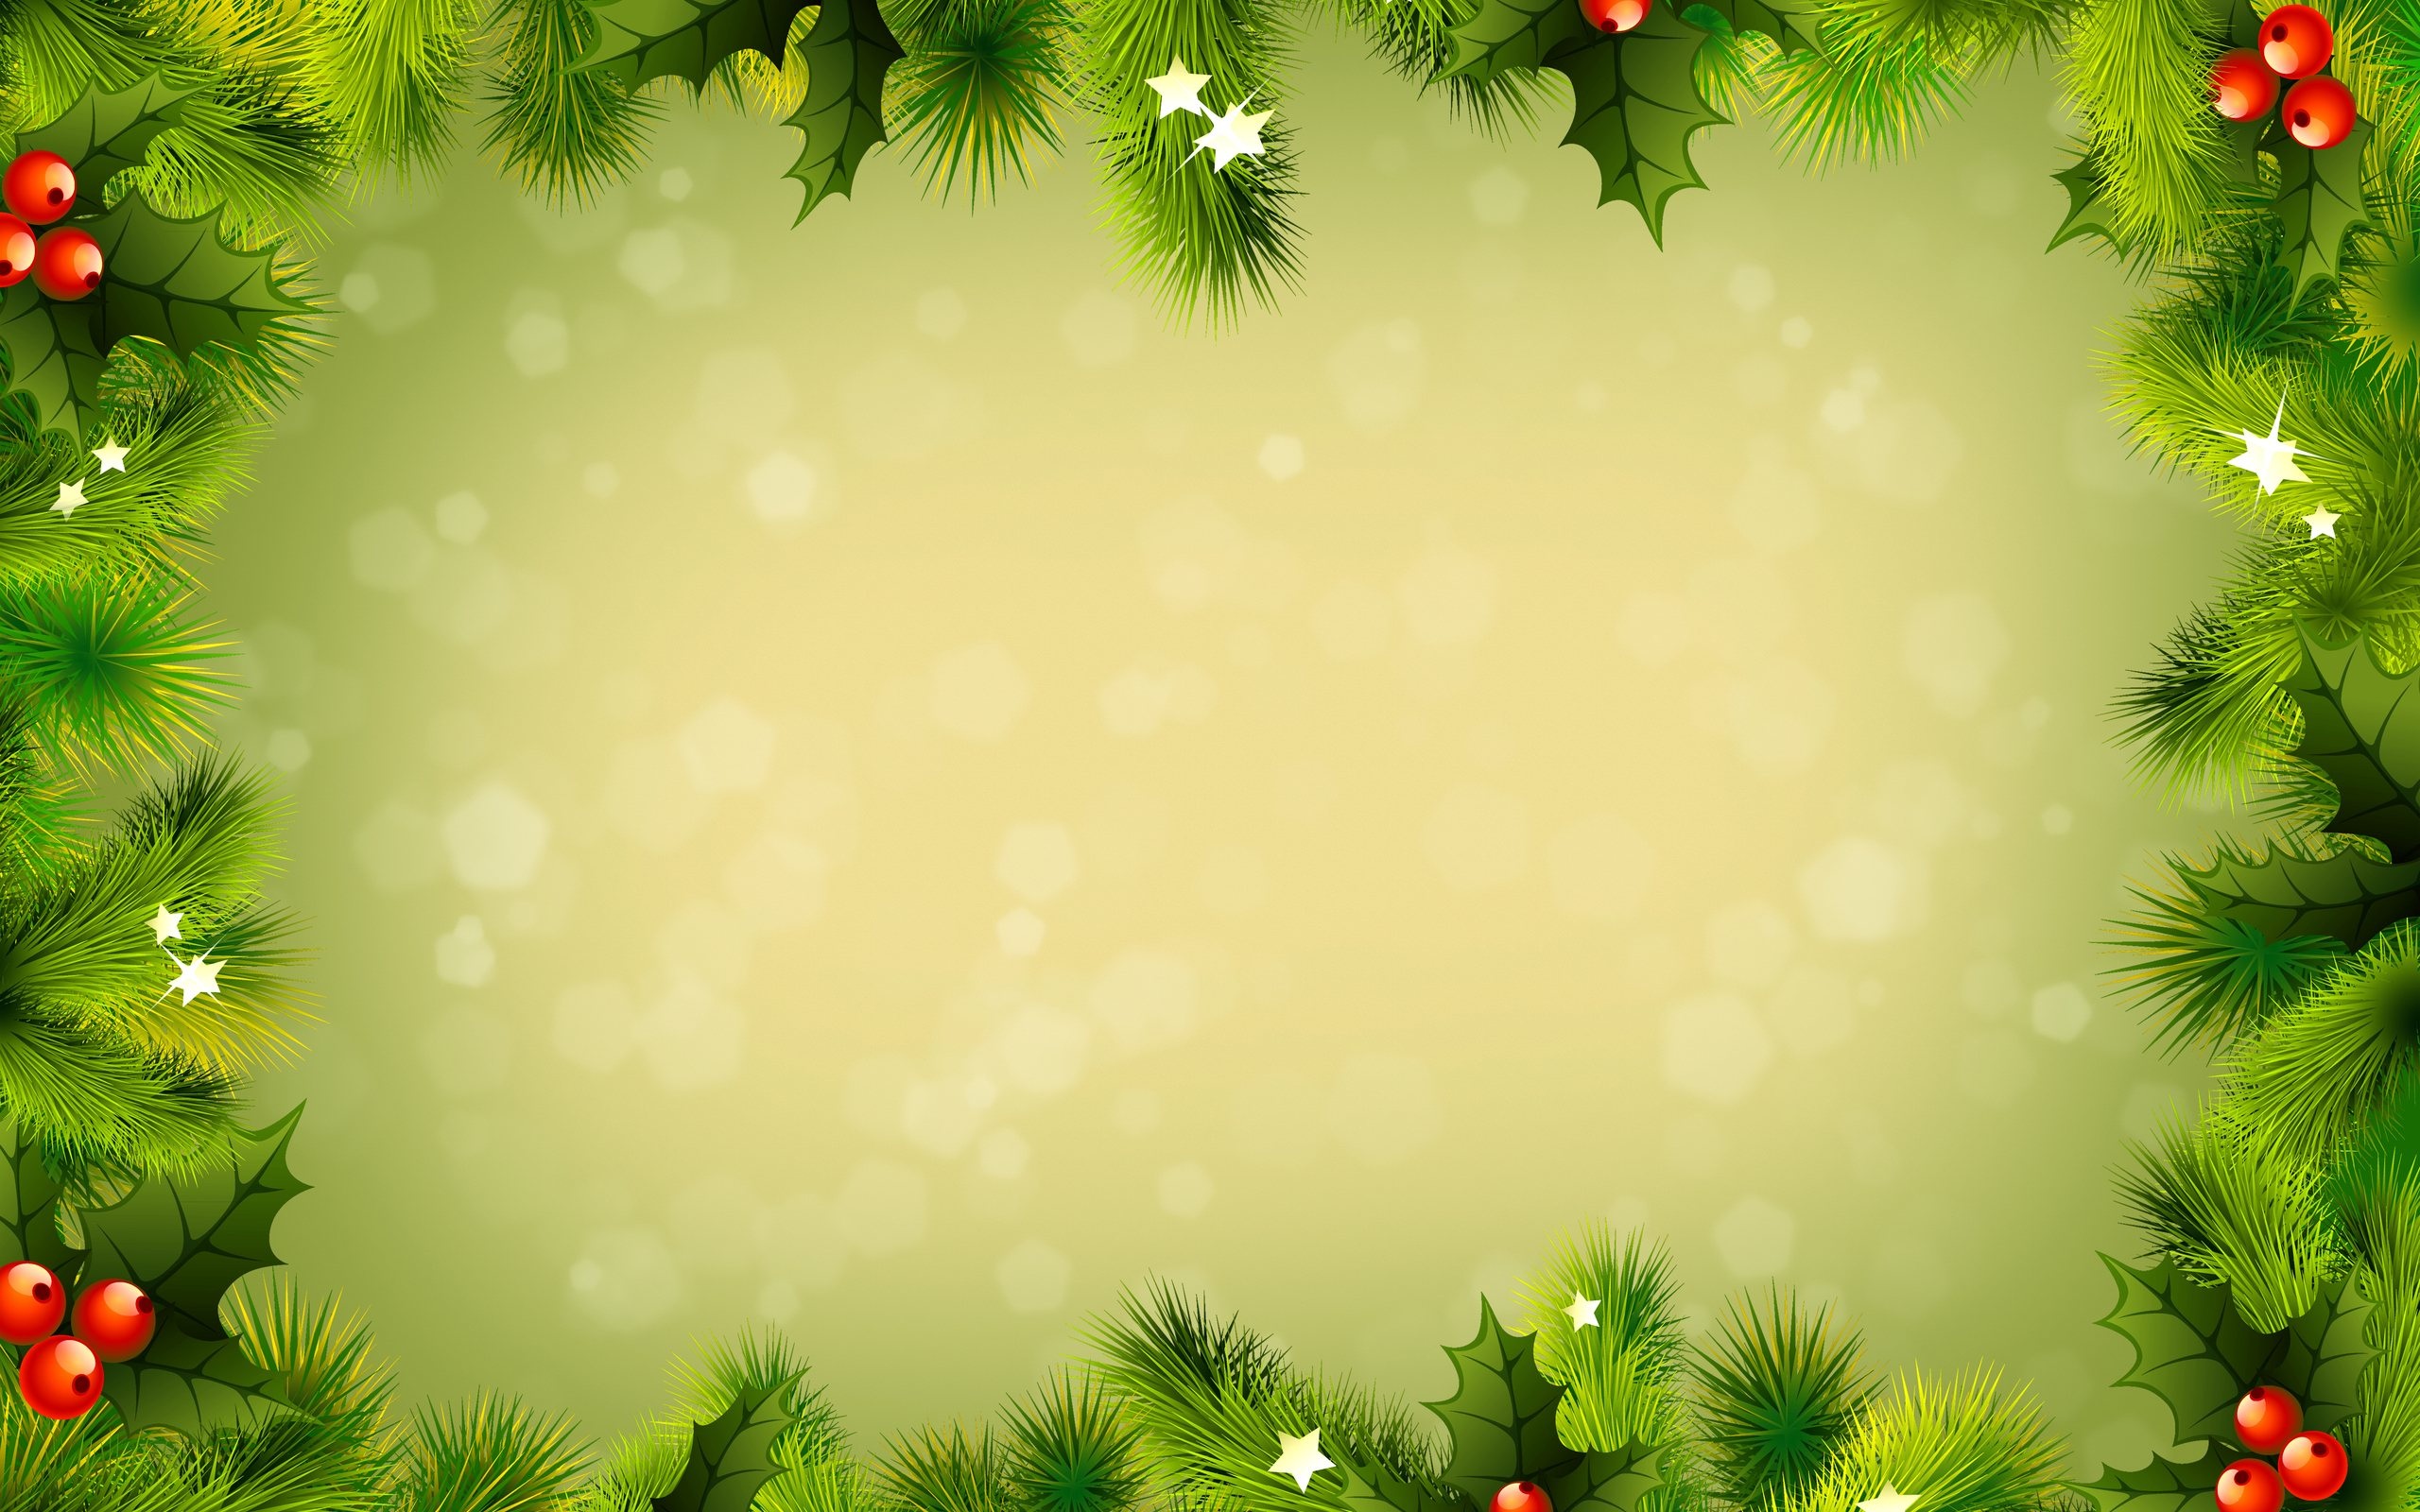 Christmas Backgrounds Group (74+)